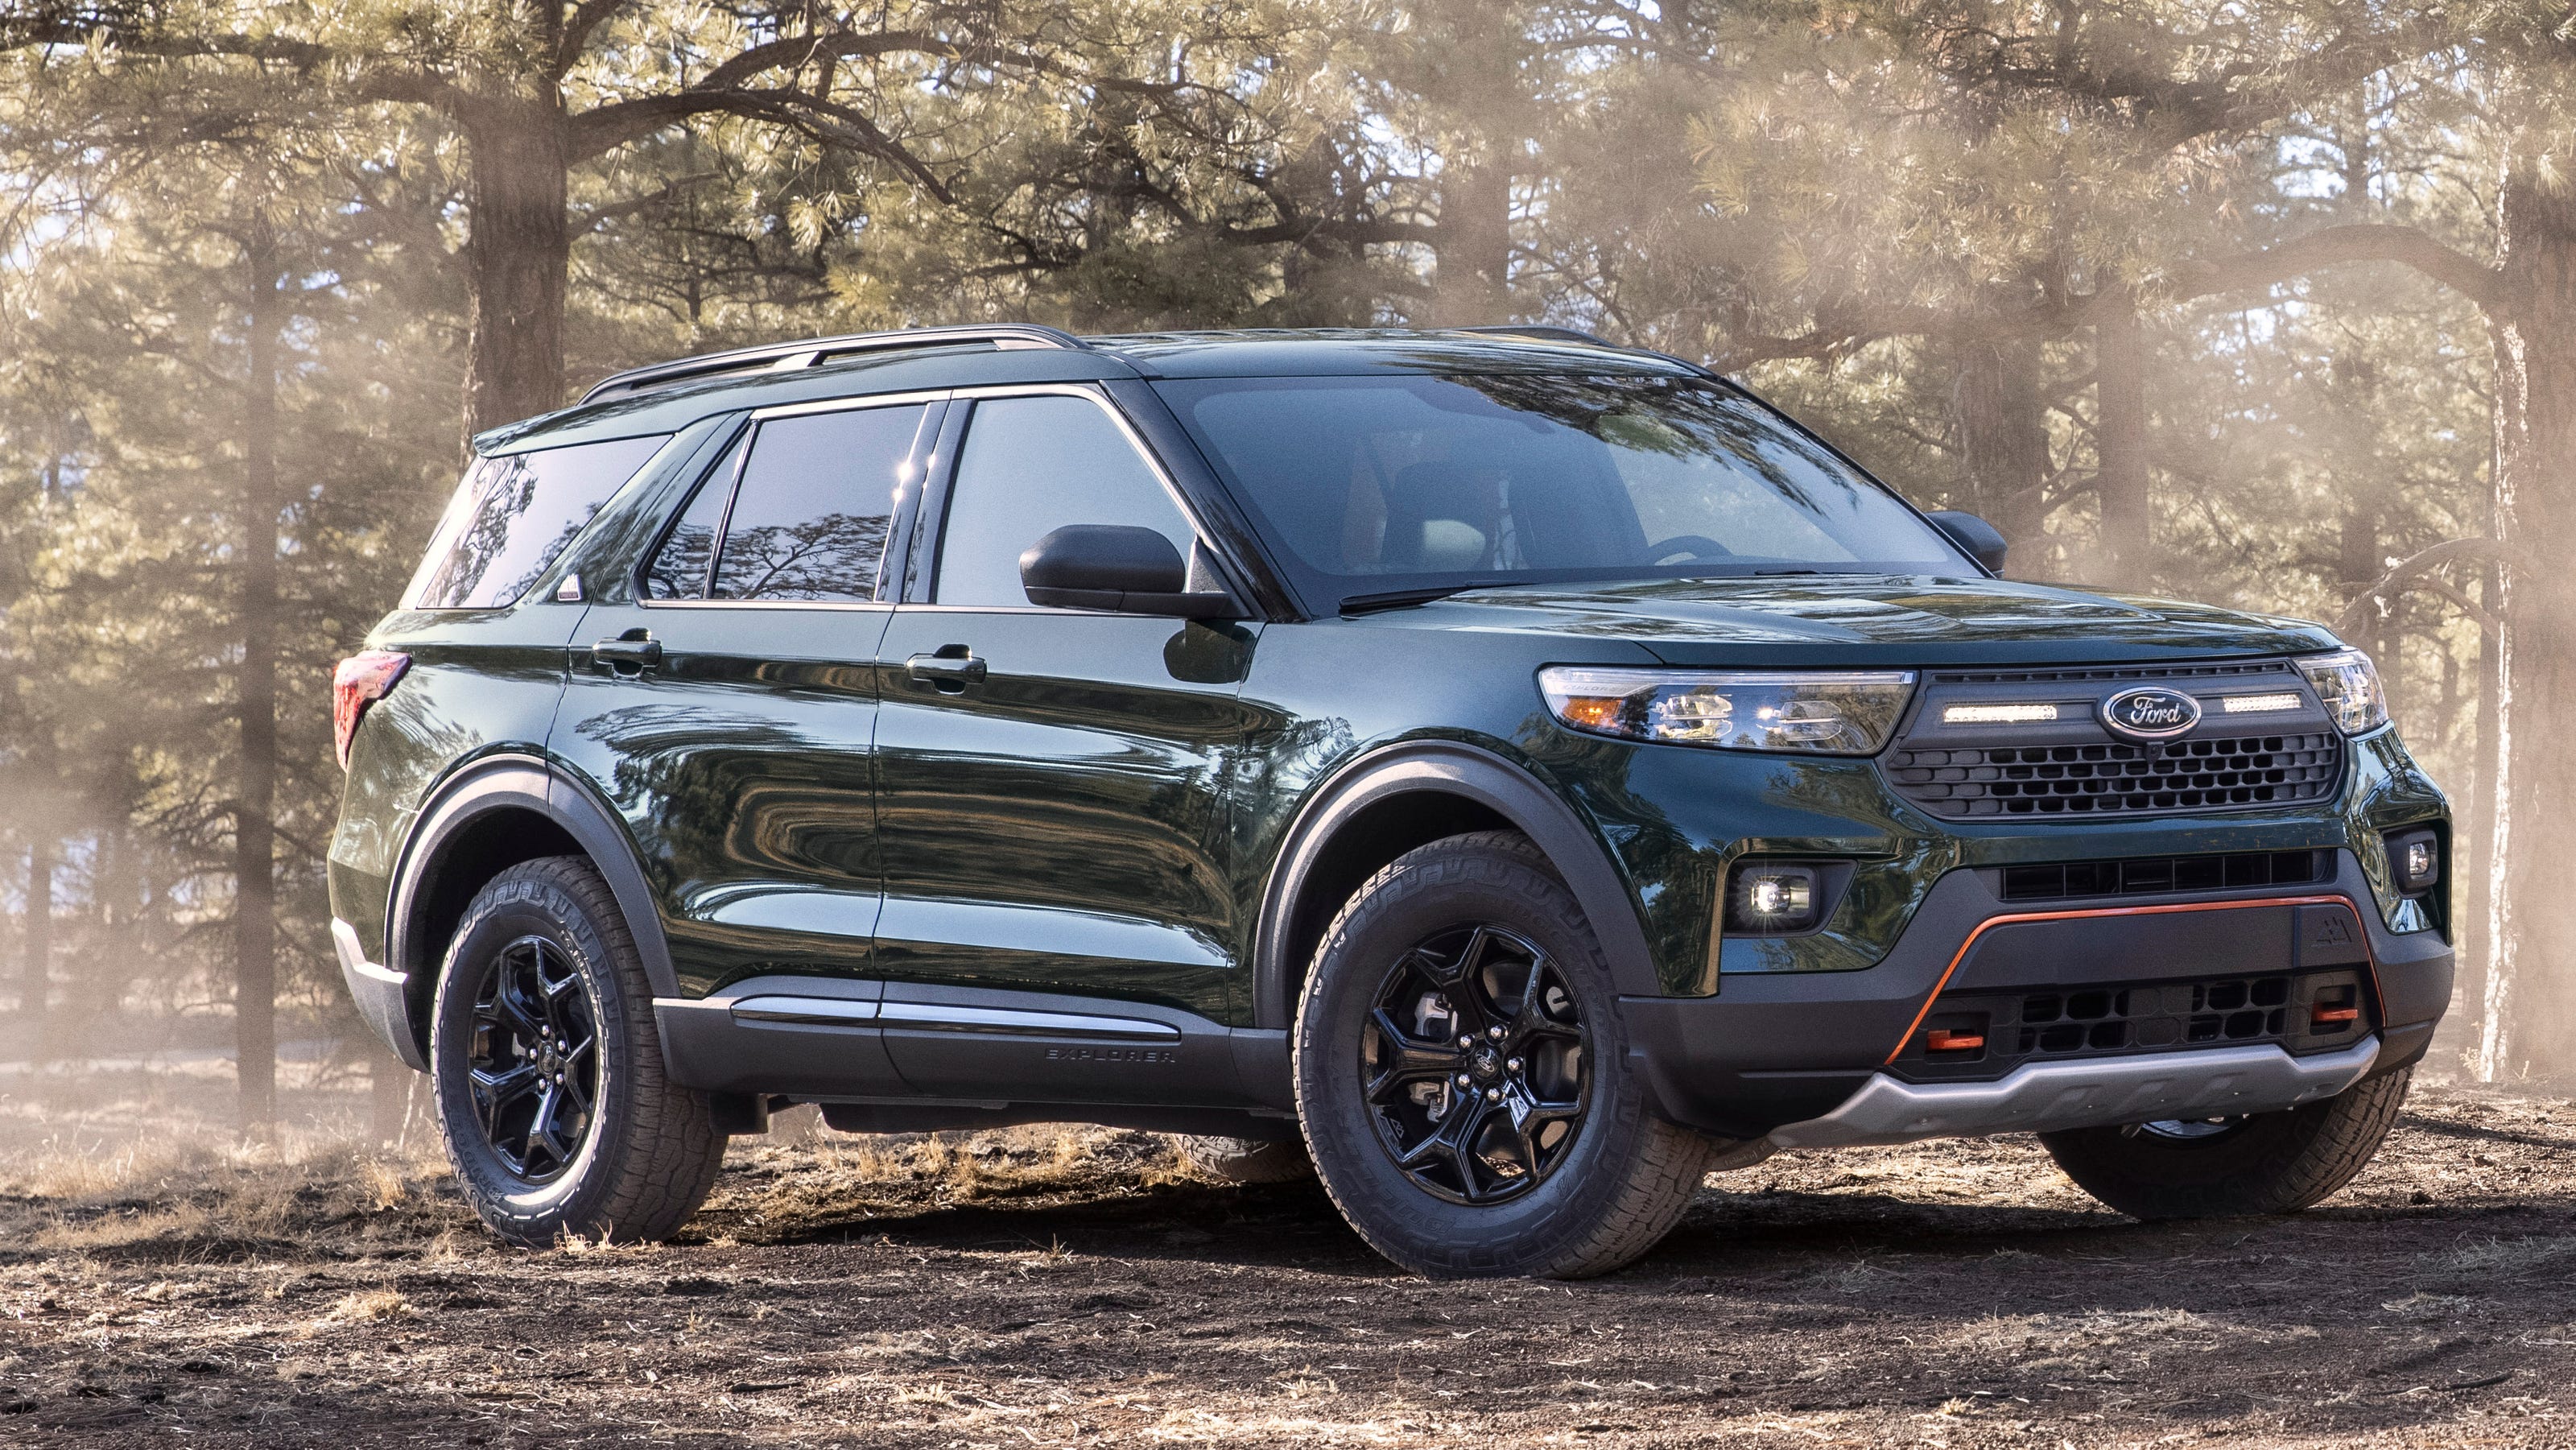 2021 Ford Explorer Timberline adds off-road capability, unique looks